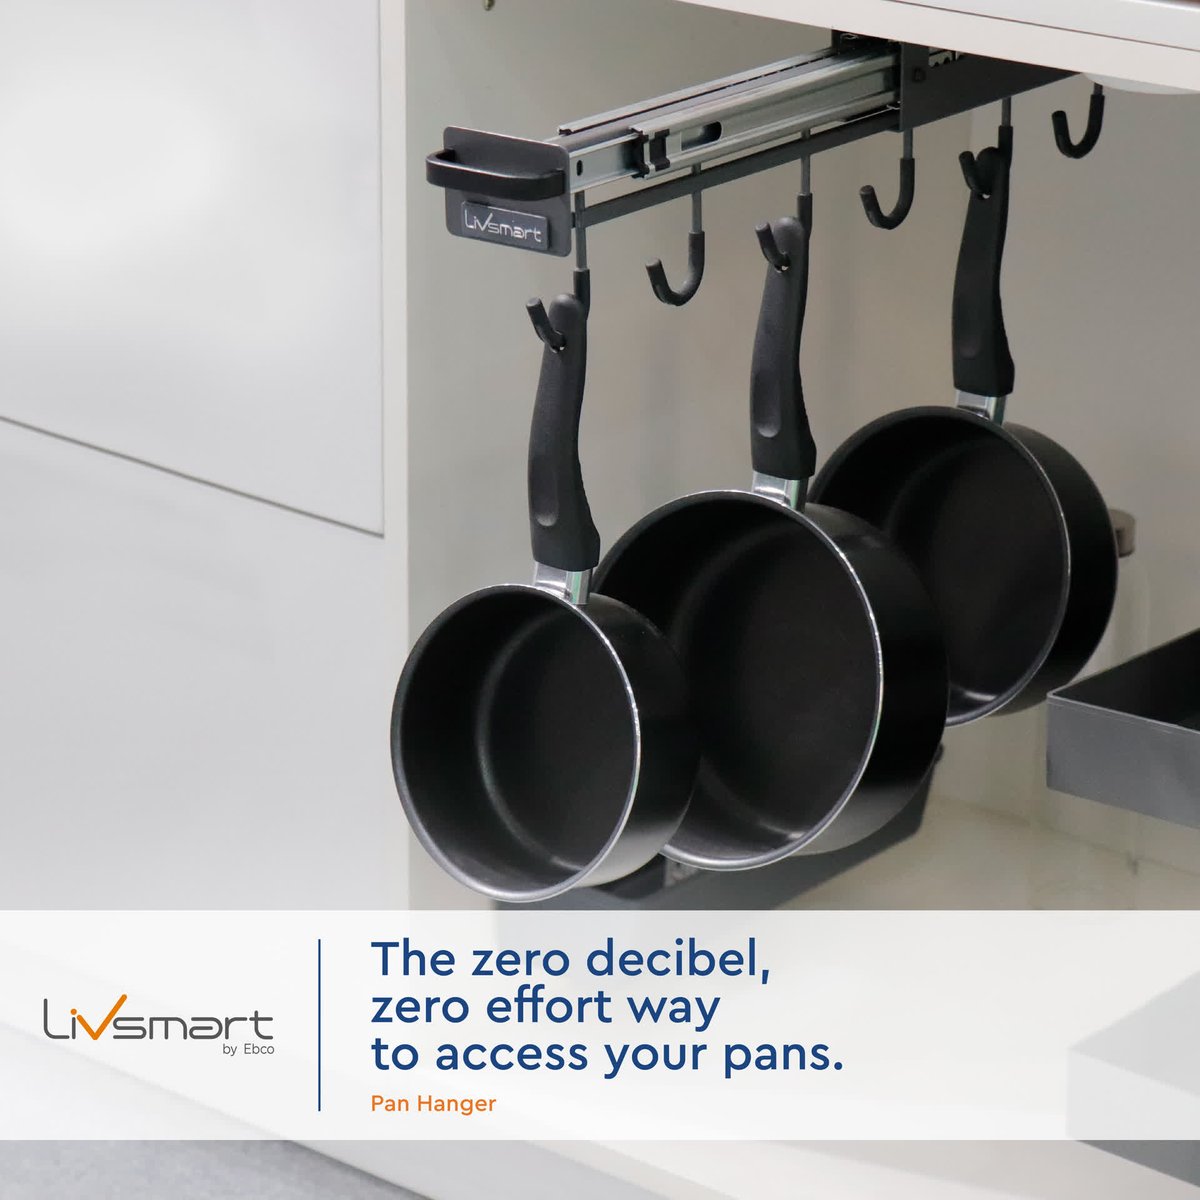 Long gone are the days when you had to wake up your entire family, just to find the right pan. Assorting pans, made effortless with Ebco’s Pan Hanger.

#Ebco #Livsmart